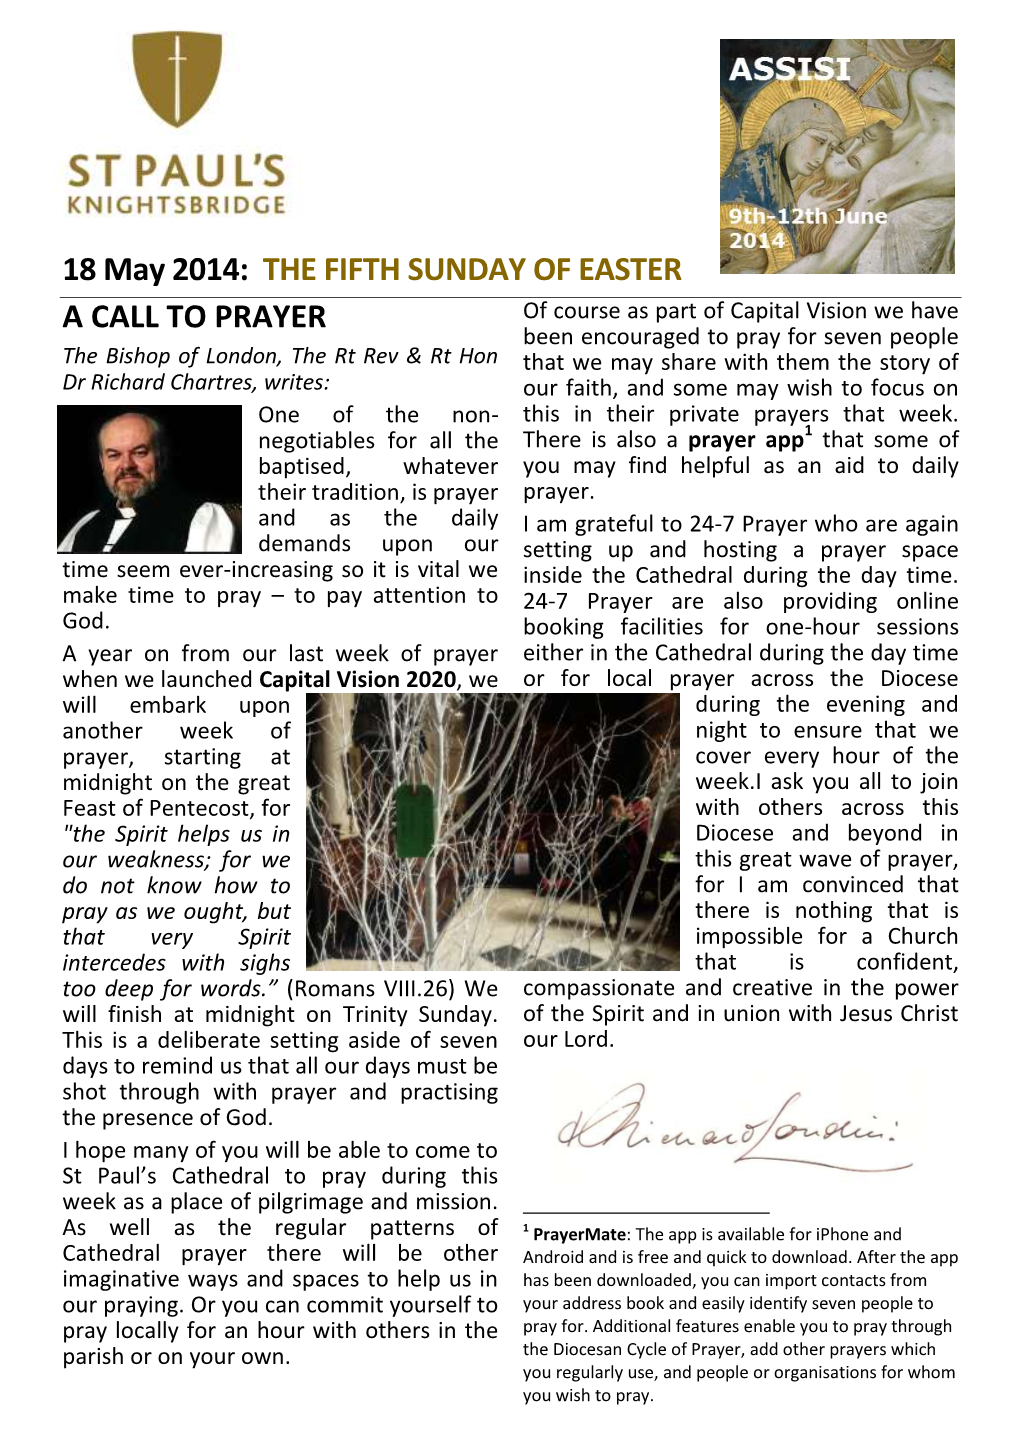 18 May 2014: the FIFTH SUNDAY of EASTER a CALL to PRAYER